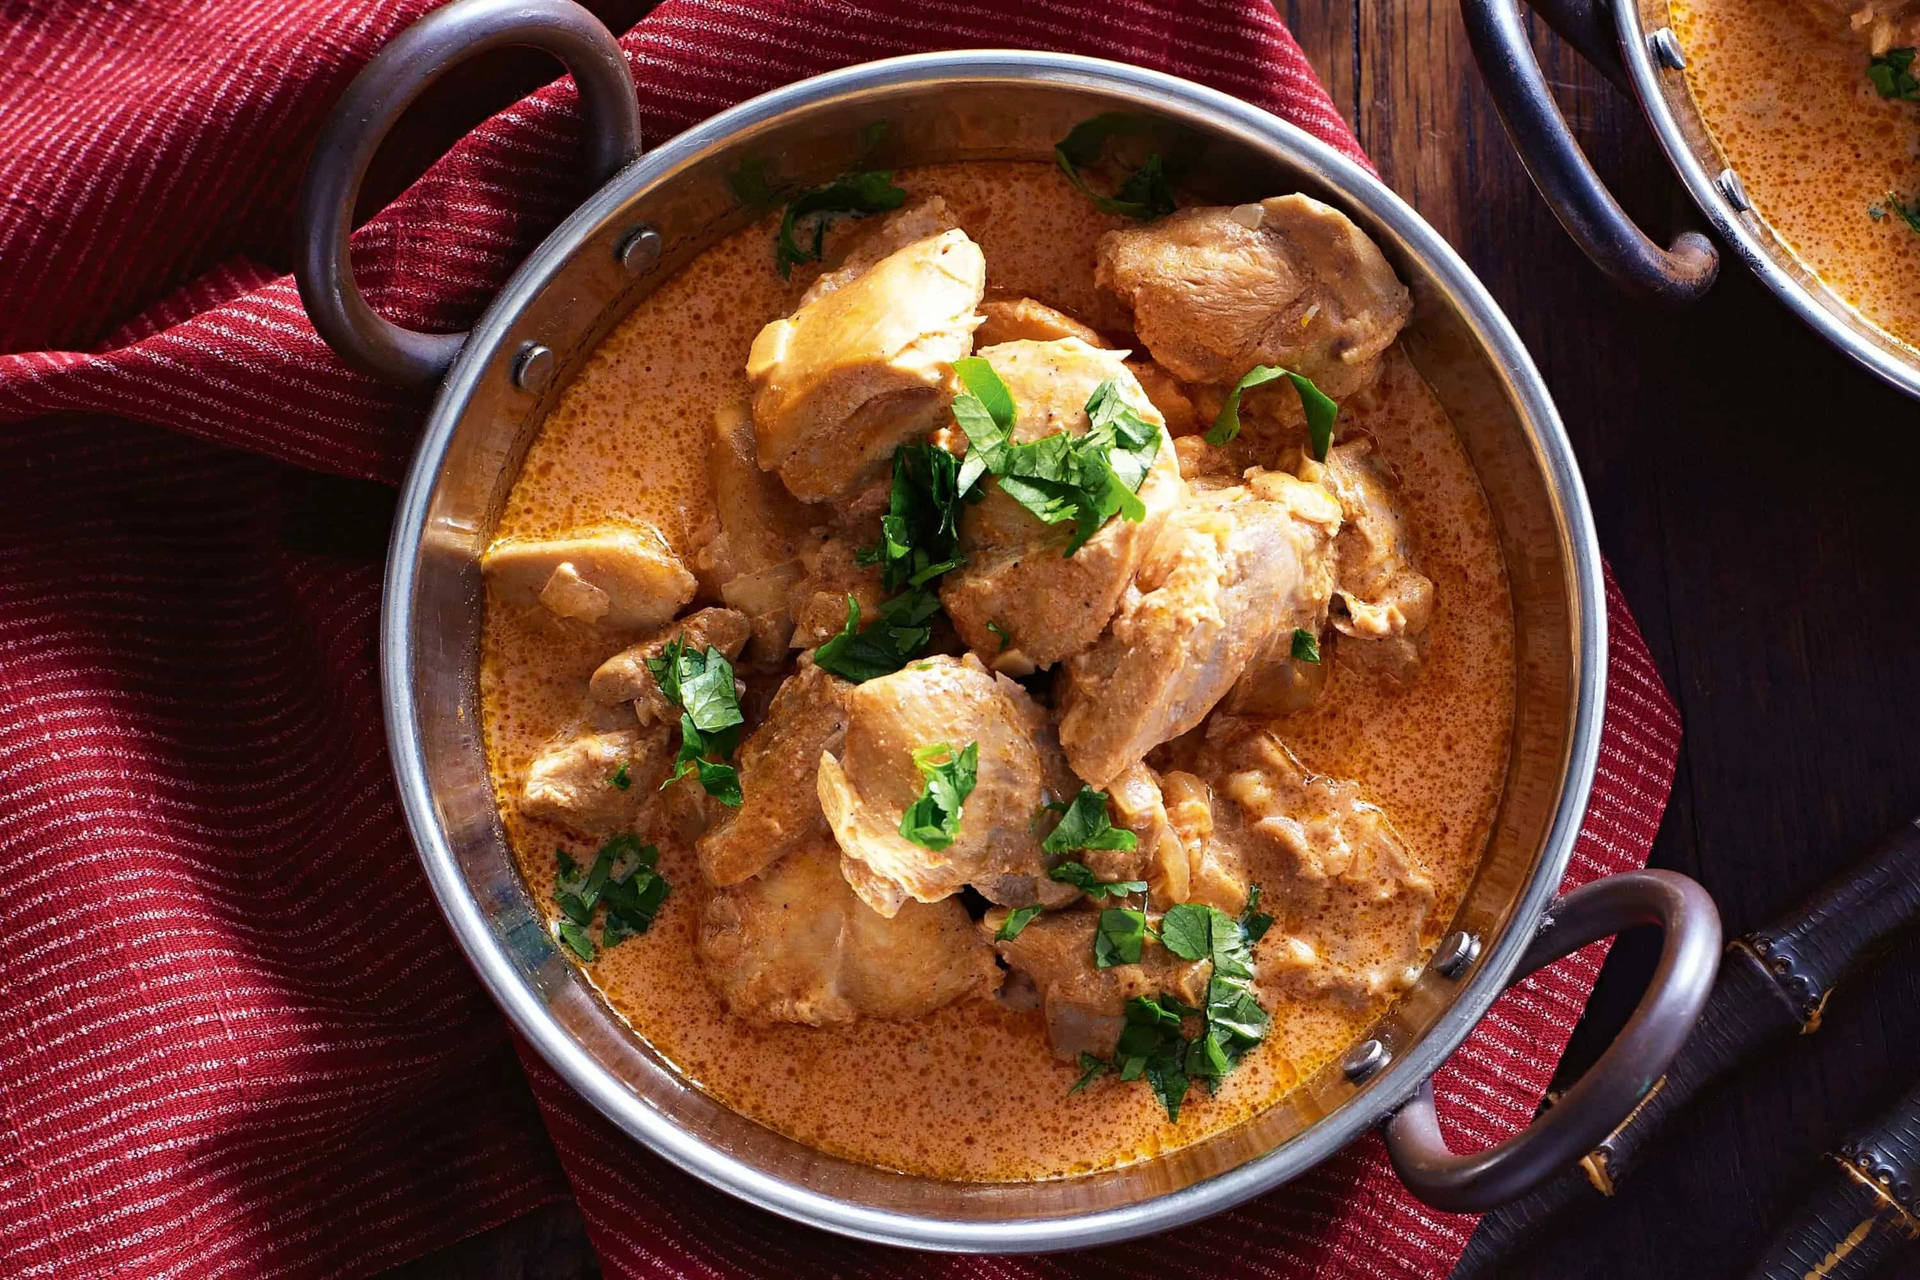 Delectable Butter Chicken cuisine at its finest. Wallpaper